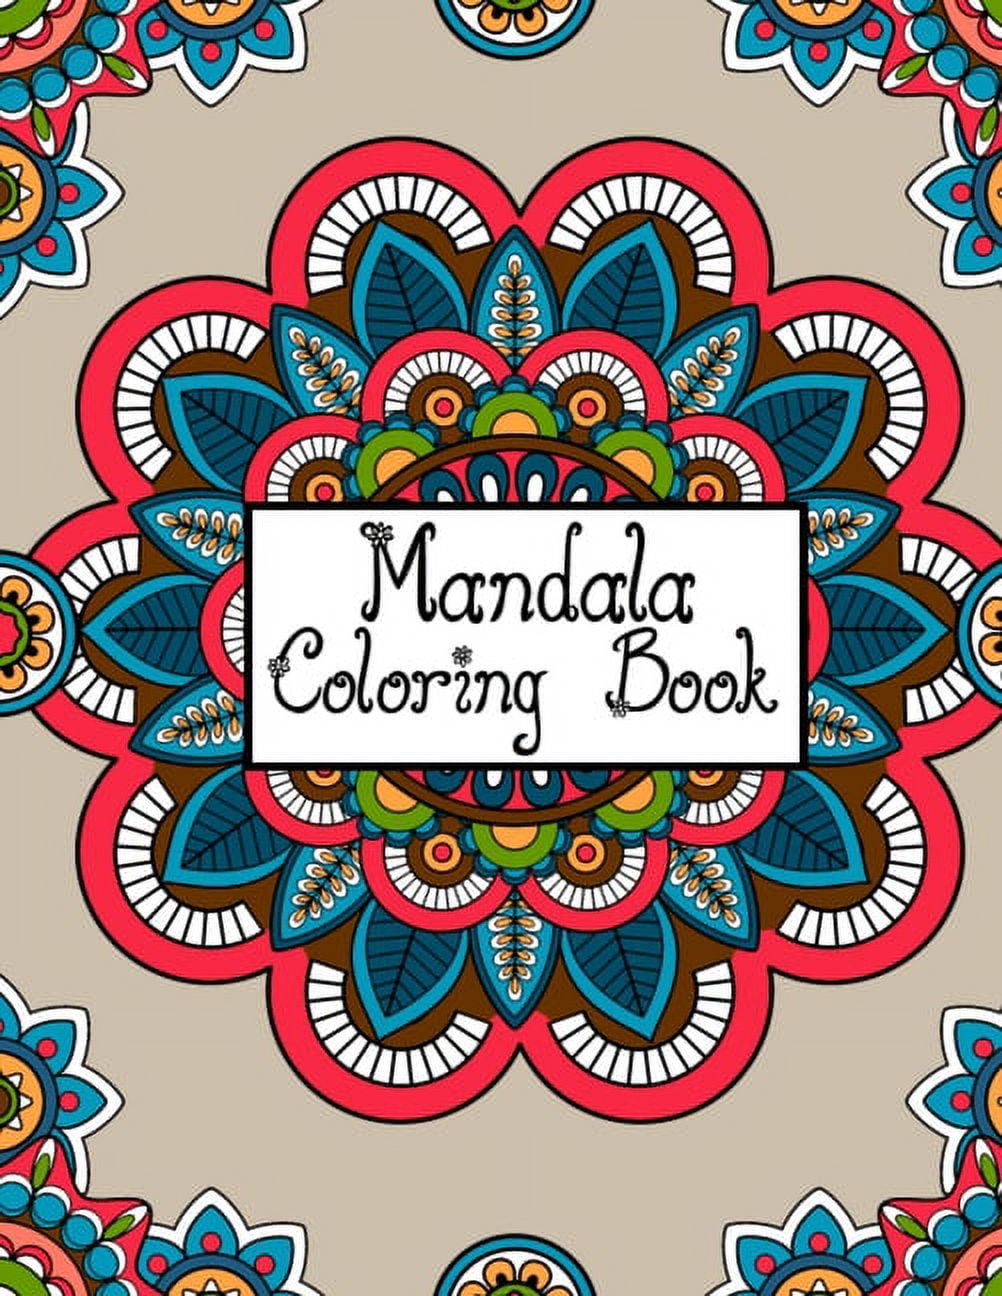 Adult Coloring Books:Mandalas: Coloring Books for Adults Featuring 50  Beautiful Mandala, Lace and Doodle Patterns (Hobby Habitat Coloring Books)